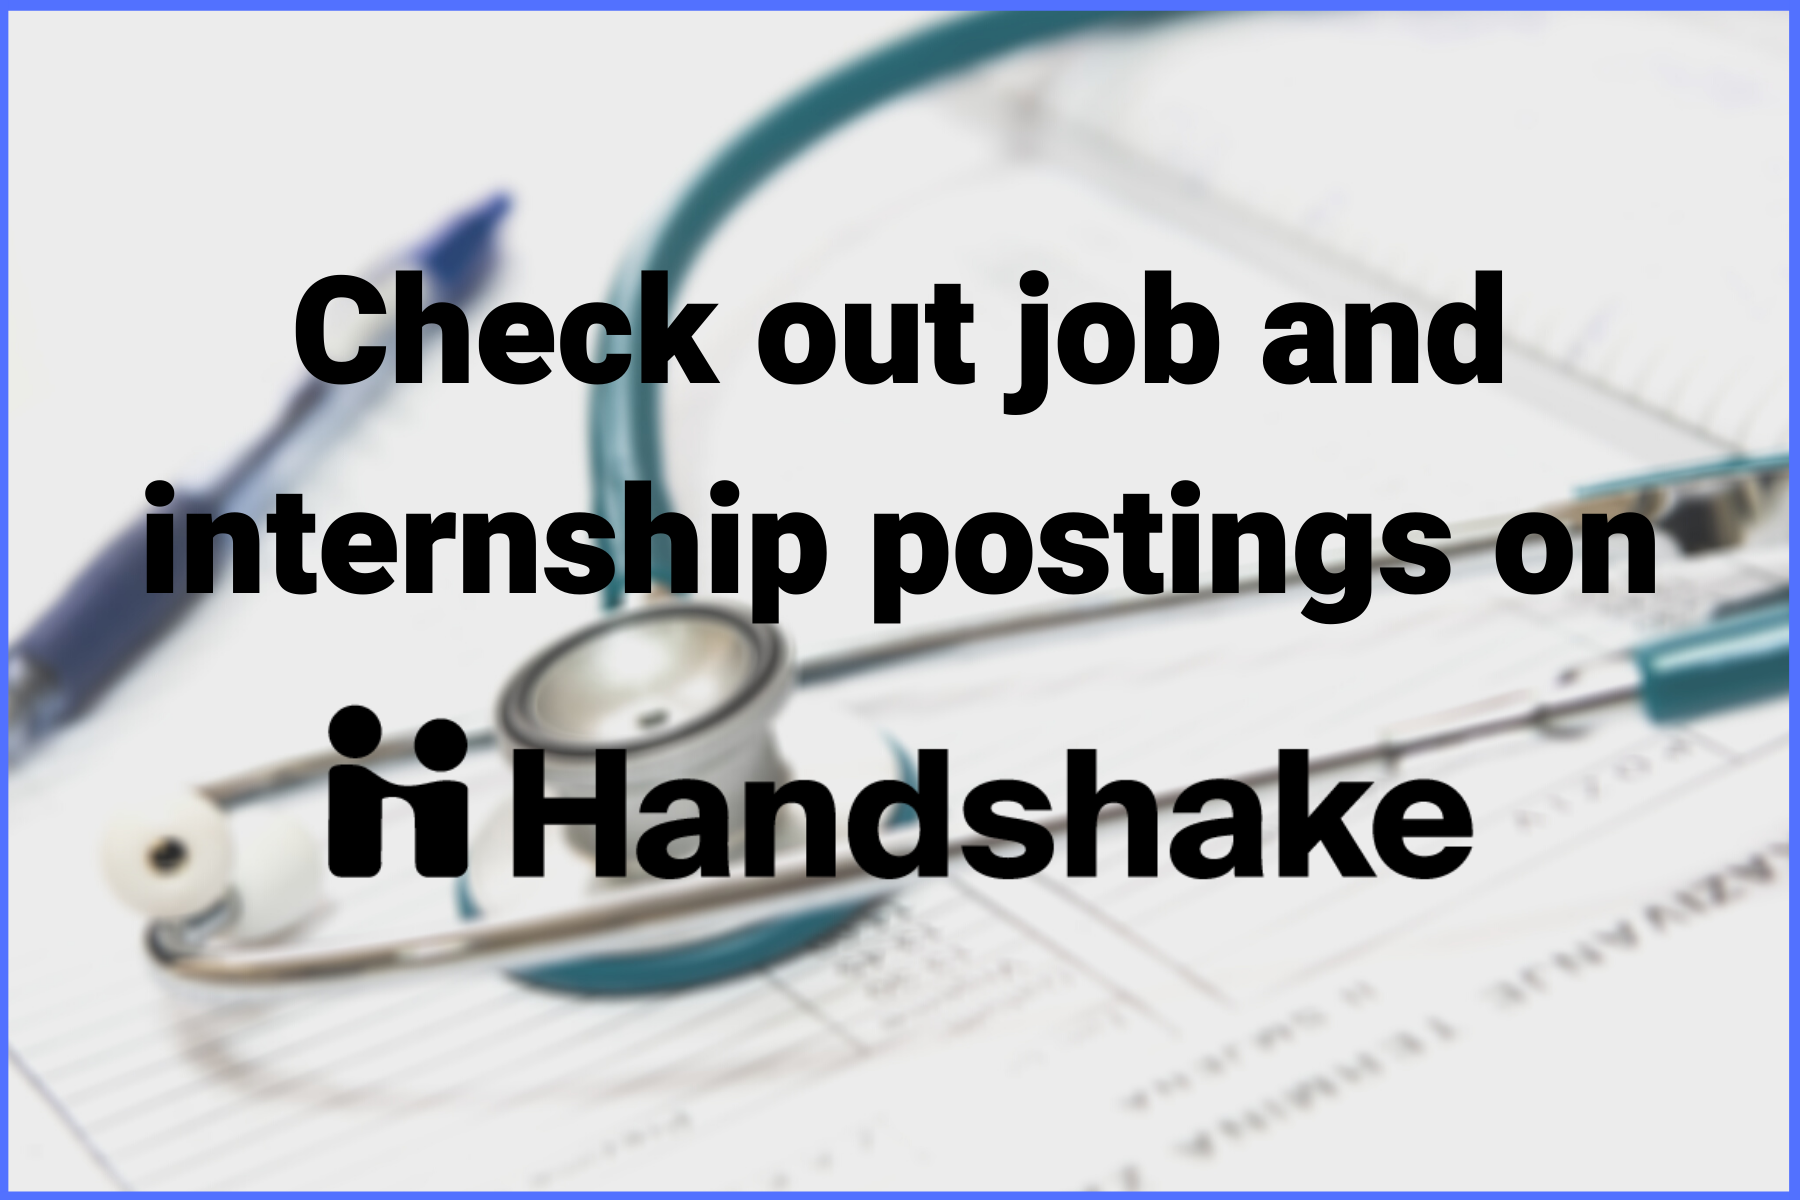 Find opportunities in health and wellness on Handshake